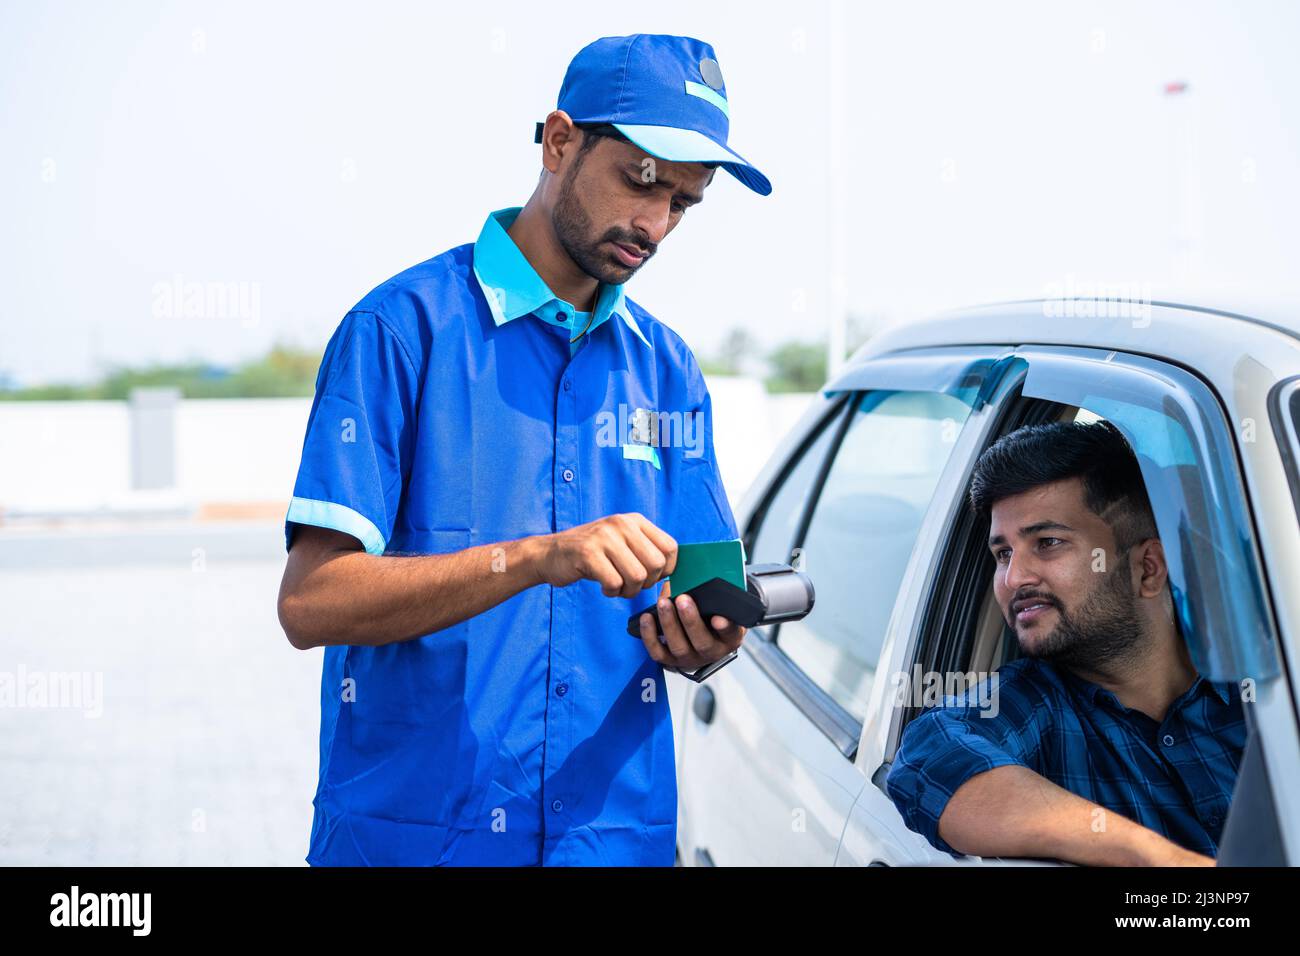 Customer doding payement using creadit card at petrol pump or gas filing station - concept of cashless transaction, technology and small business. Stock Photo